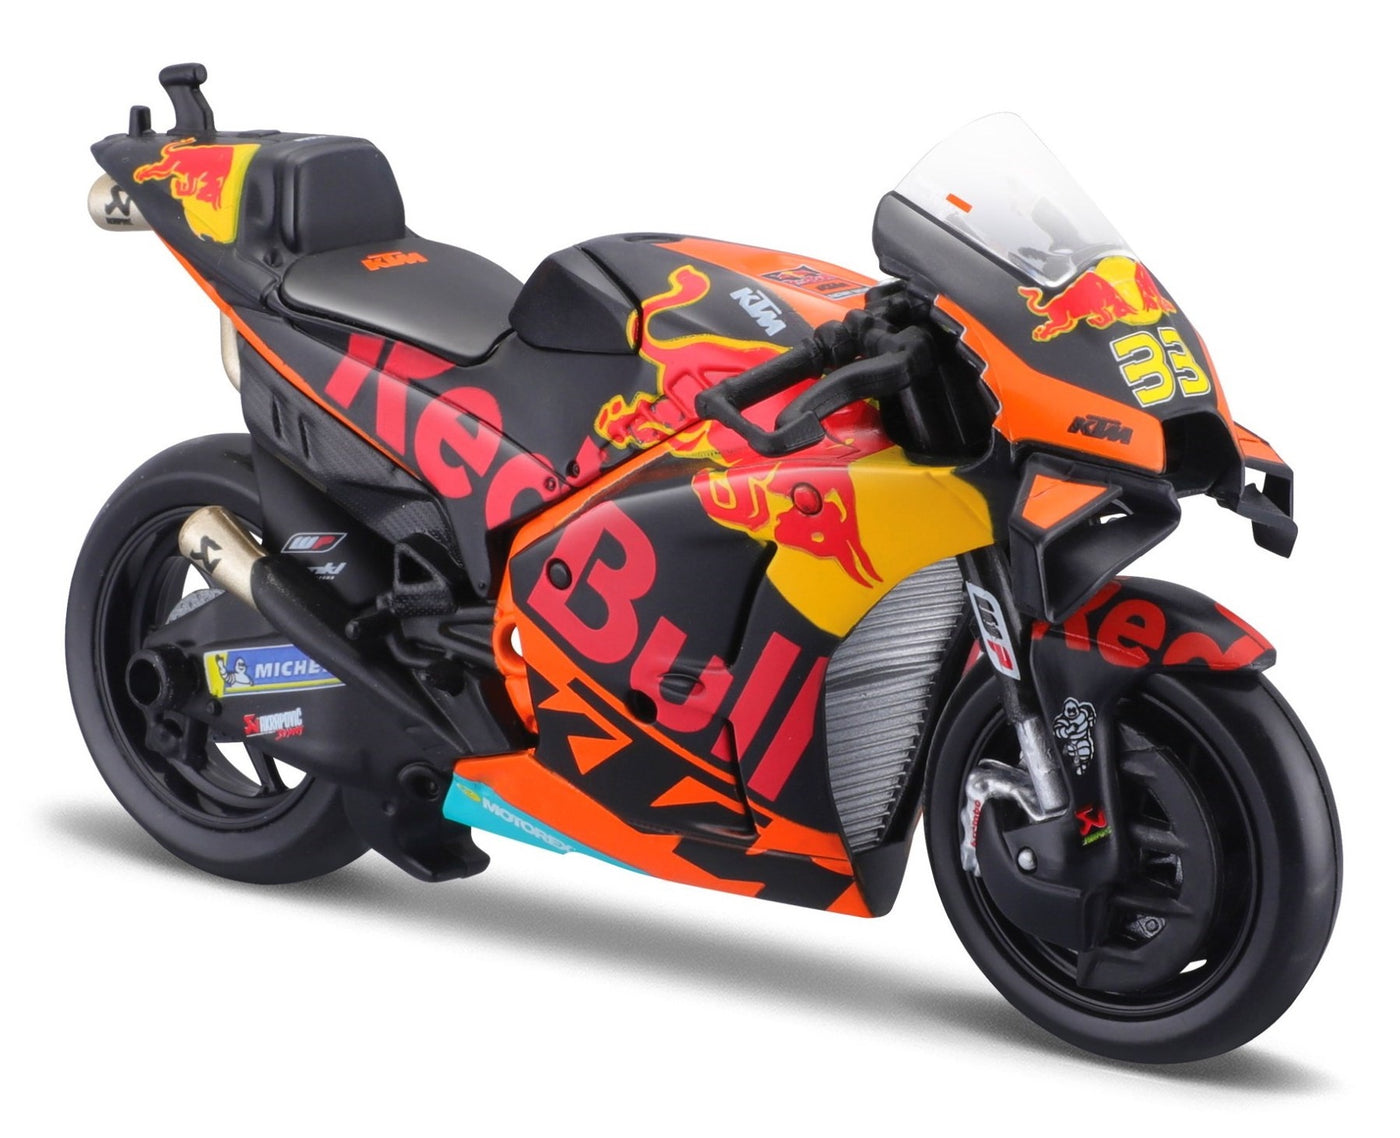 7 Red Bull Stickers Decal ideas  red bull, bull, harley davidson